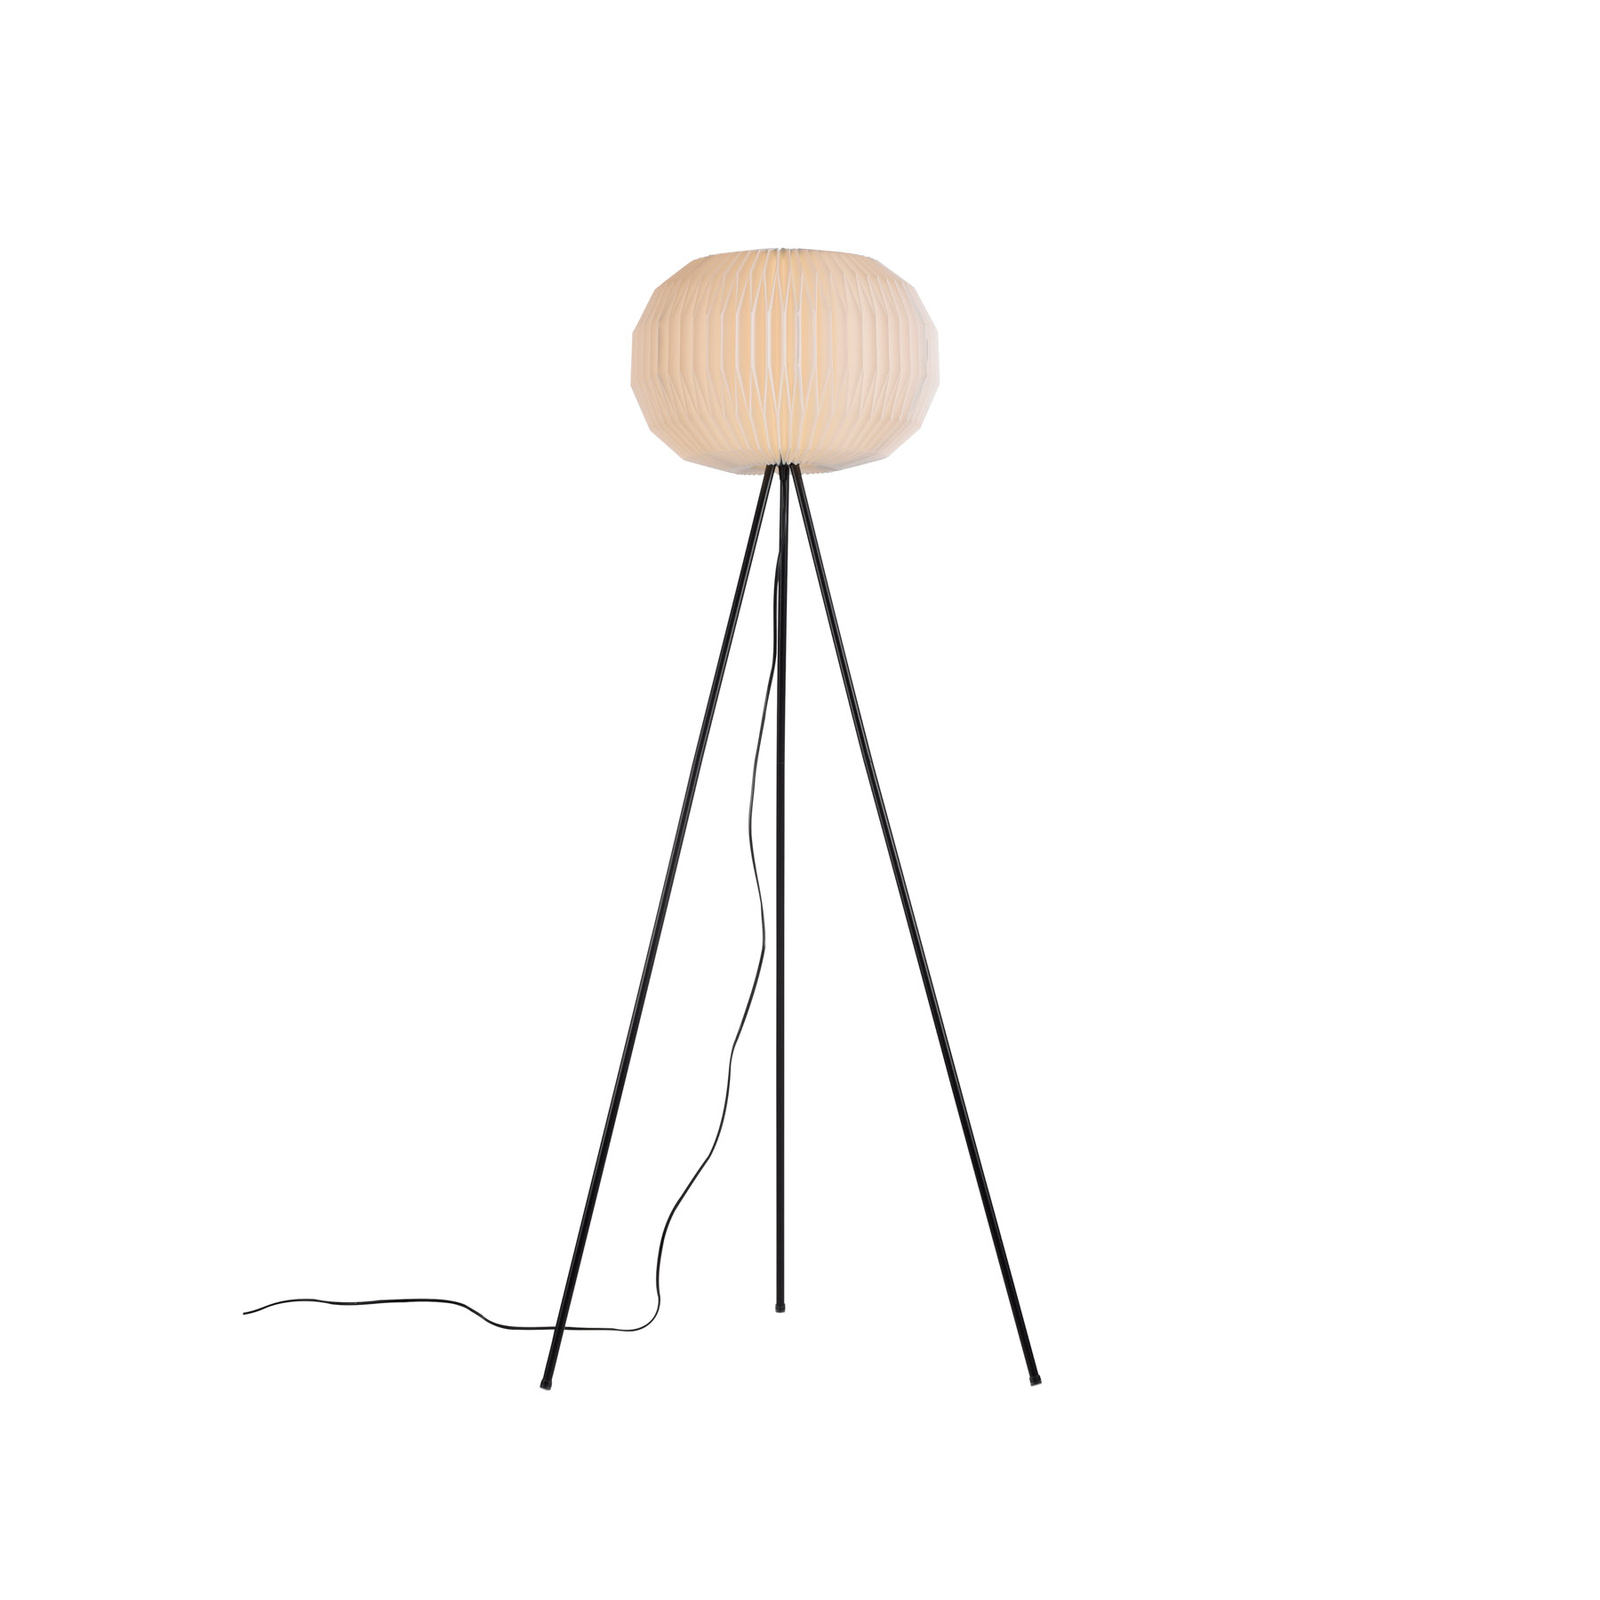 Papel floor lamp with white lampshade